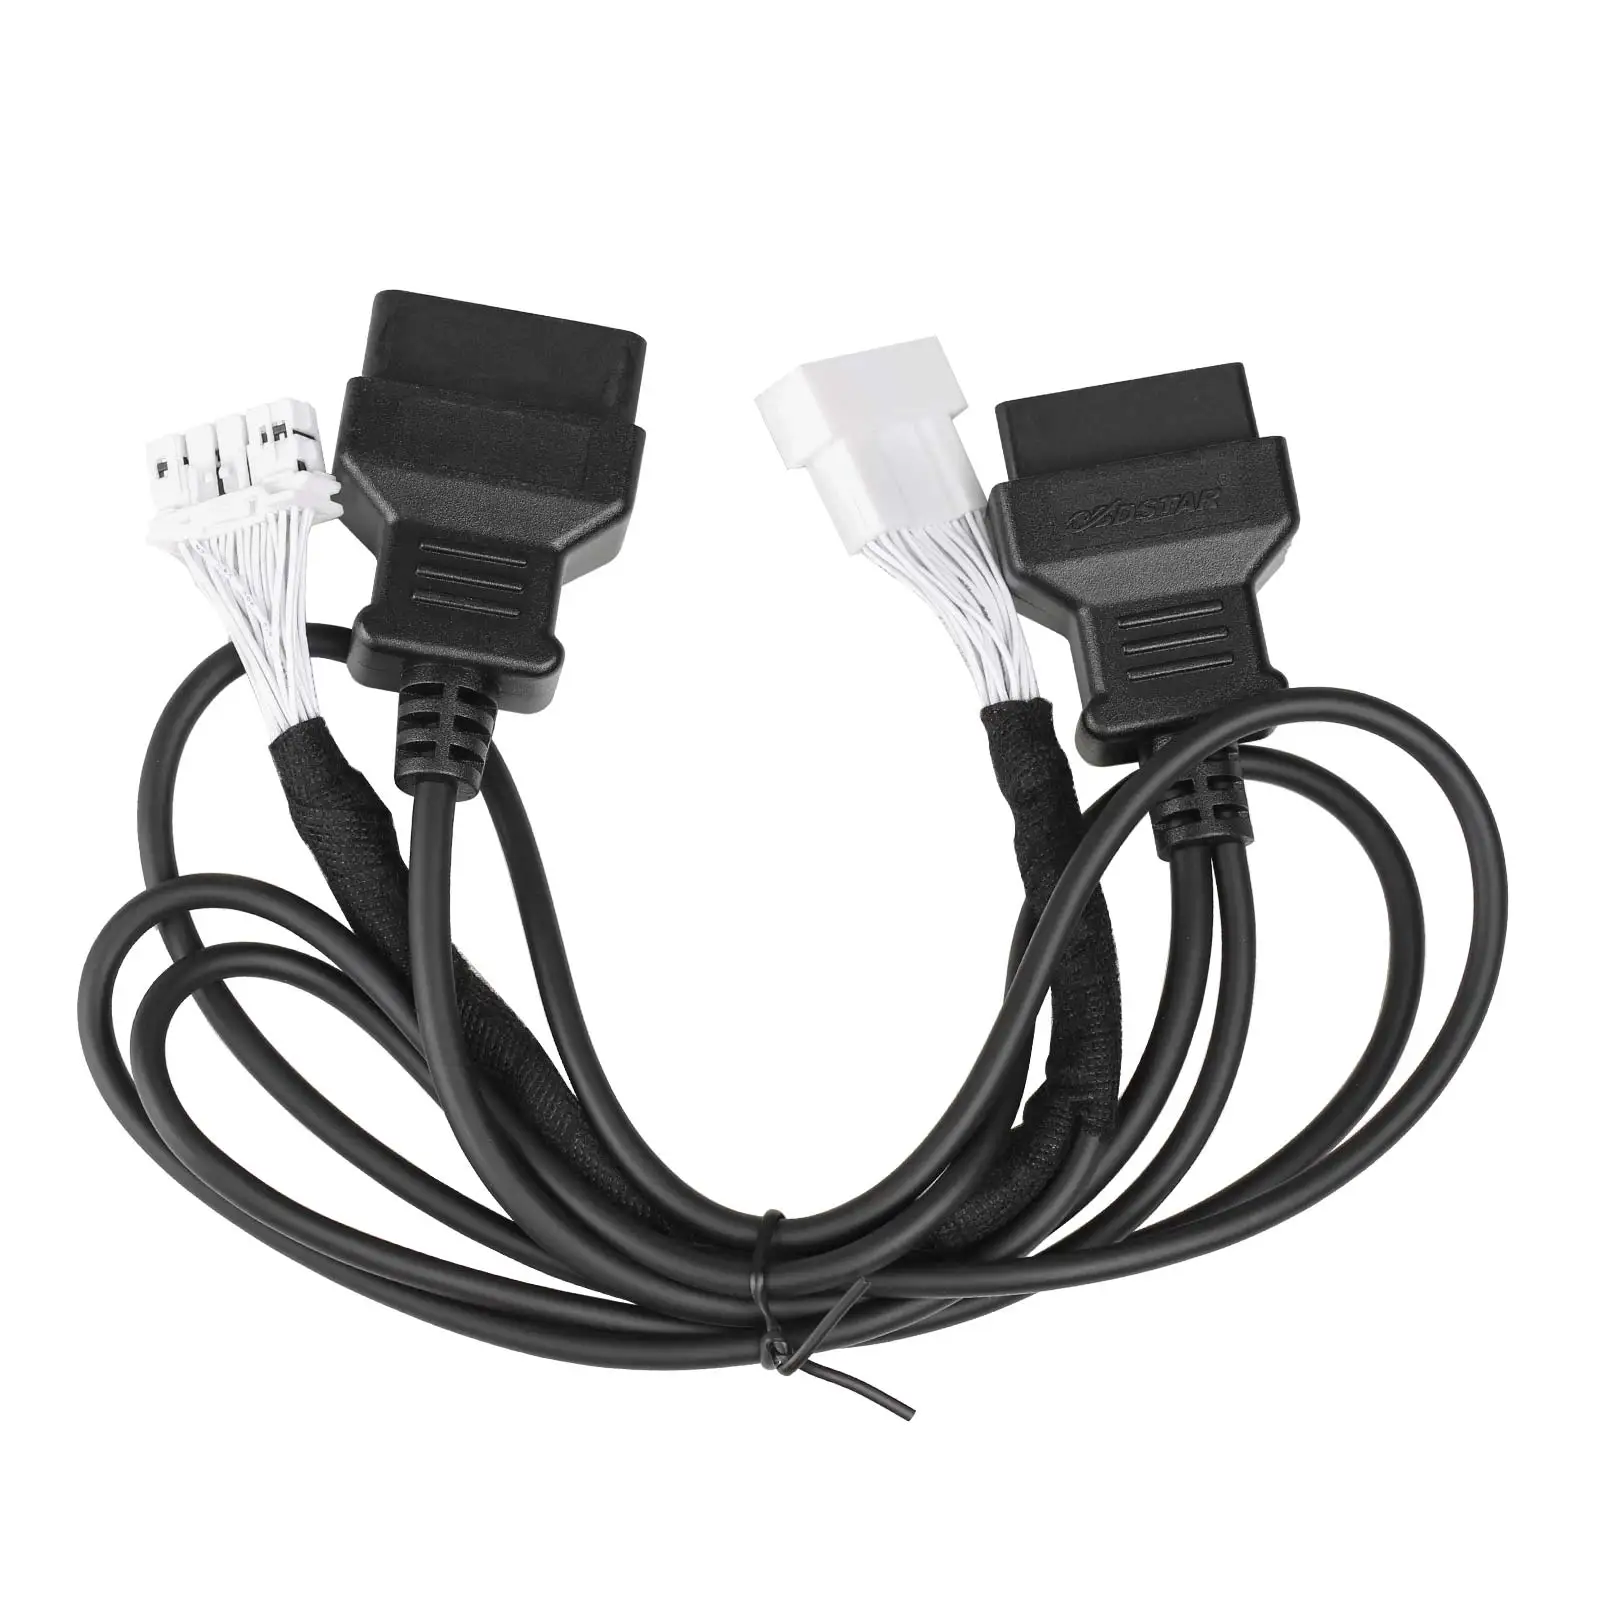 

2023 OBDSTAR Toyota-30 Cable Proximity Key Programming All Key Lost Support 4A and 8A-BA No Need to Pierce the Harness for X300D